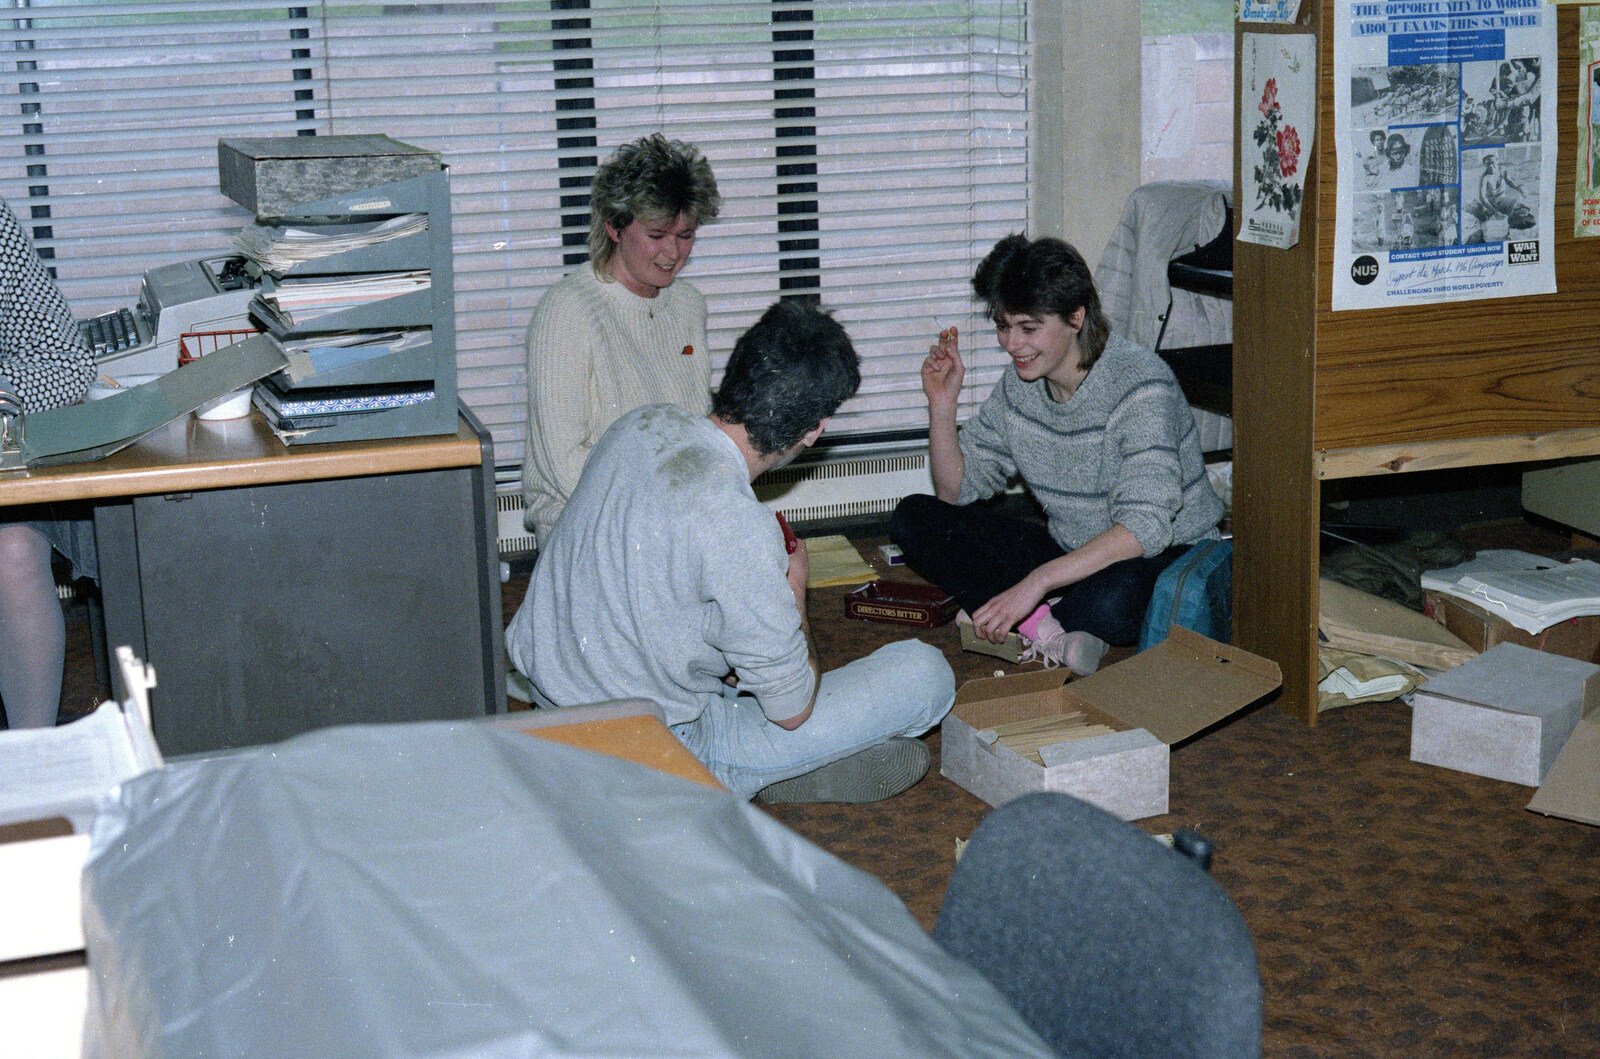 Karen Wilkins and others in the SU offices from Uni: The Pirate RAG Hit Squad, Plymouth Polytechnic, Devon - 8th February 1987